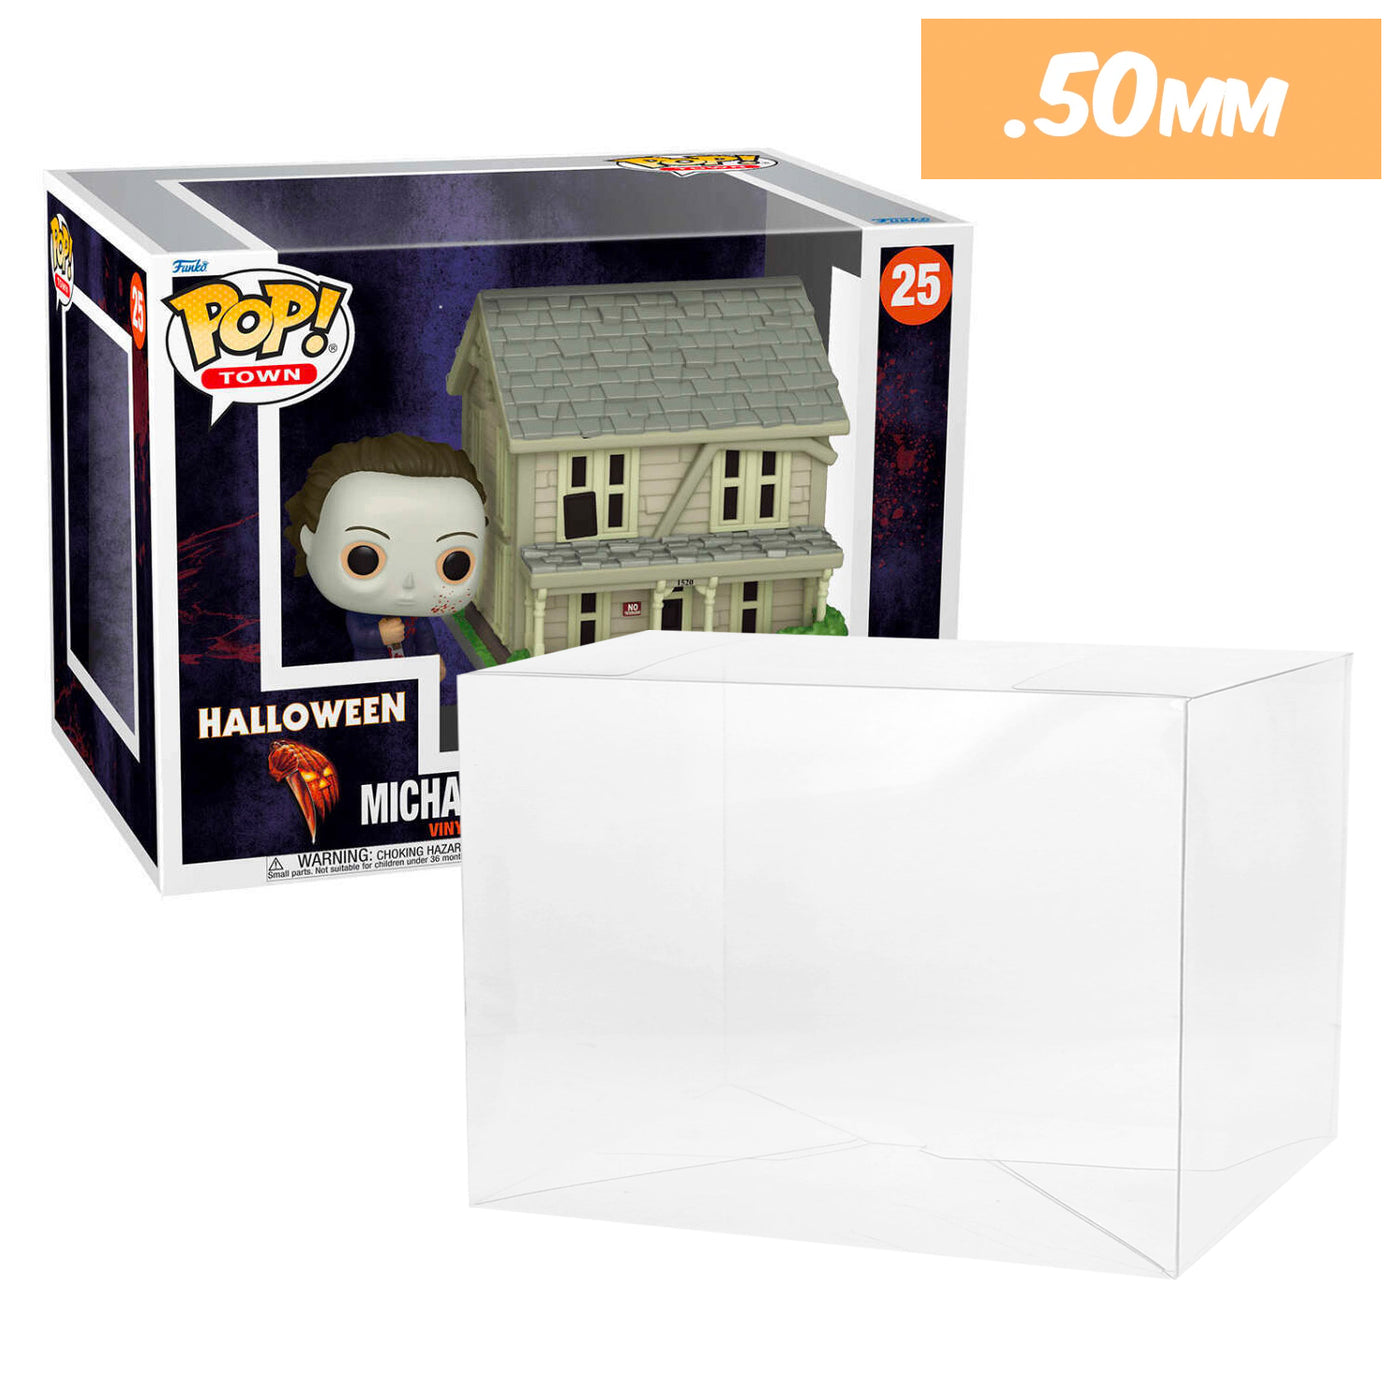 michael myers house pop town best funko pop protectors thick strong uv scratch flat top stack vinyl display geek plastic shield vaulted eco armor fits collect protect display case kollector protector